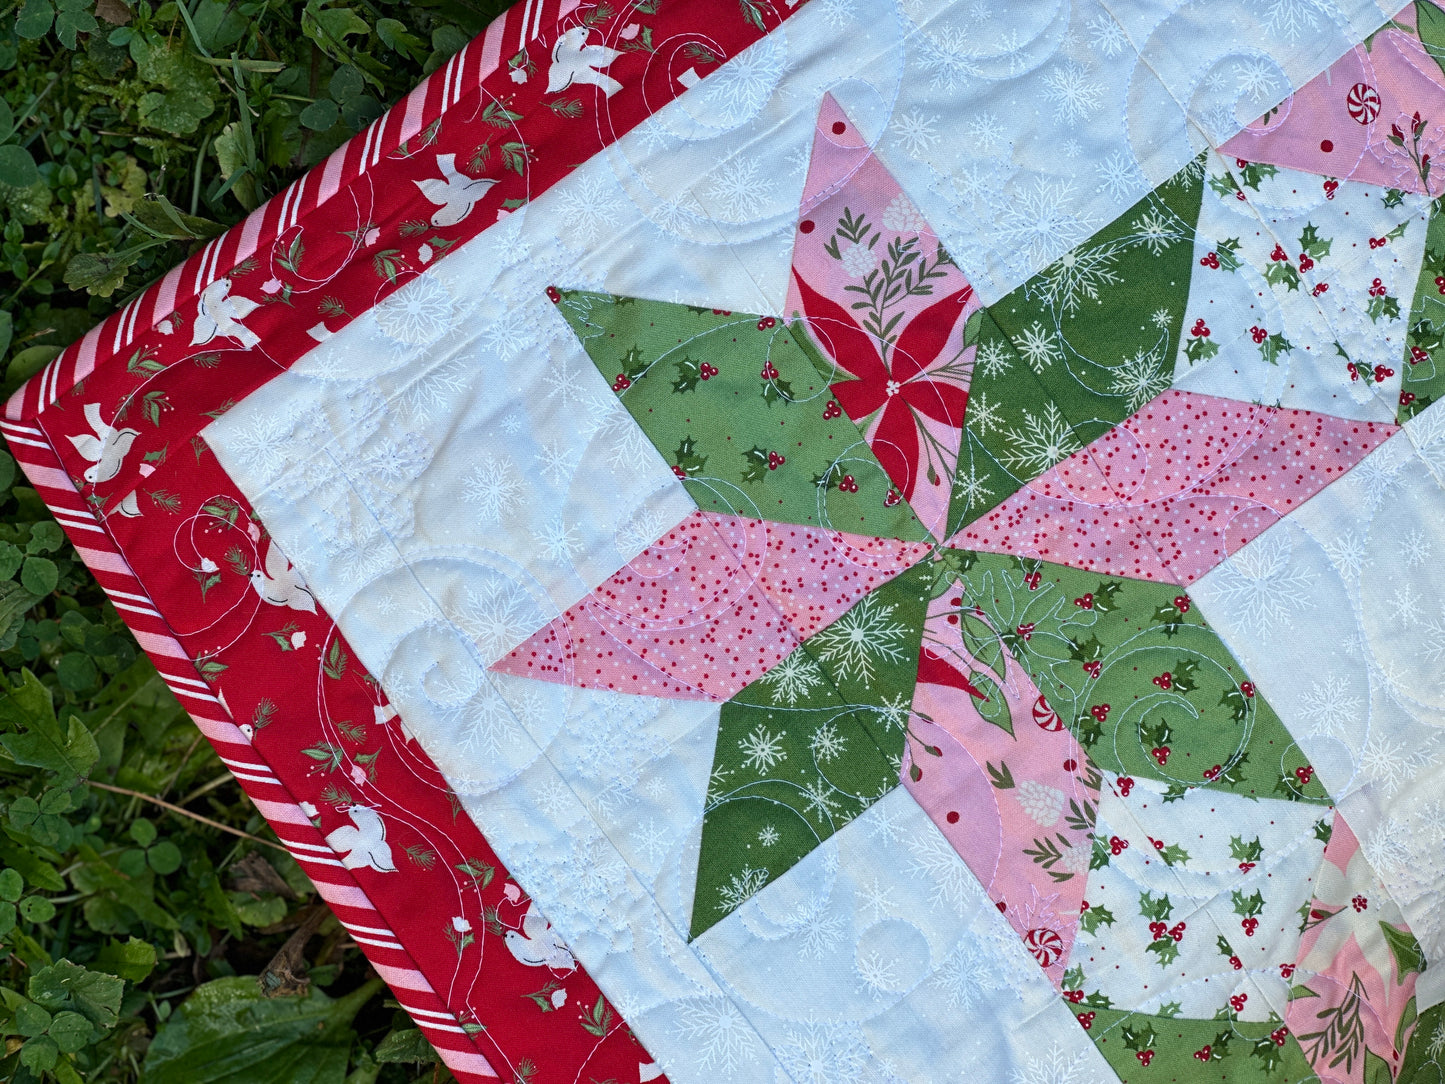 NEW! Once Upon a Christmas "Christmas Joy" Quilt Pattern (Downloadable PDF)